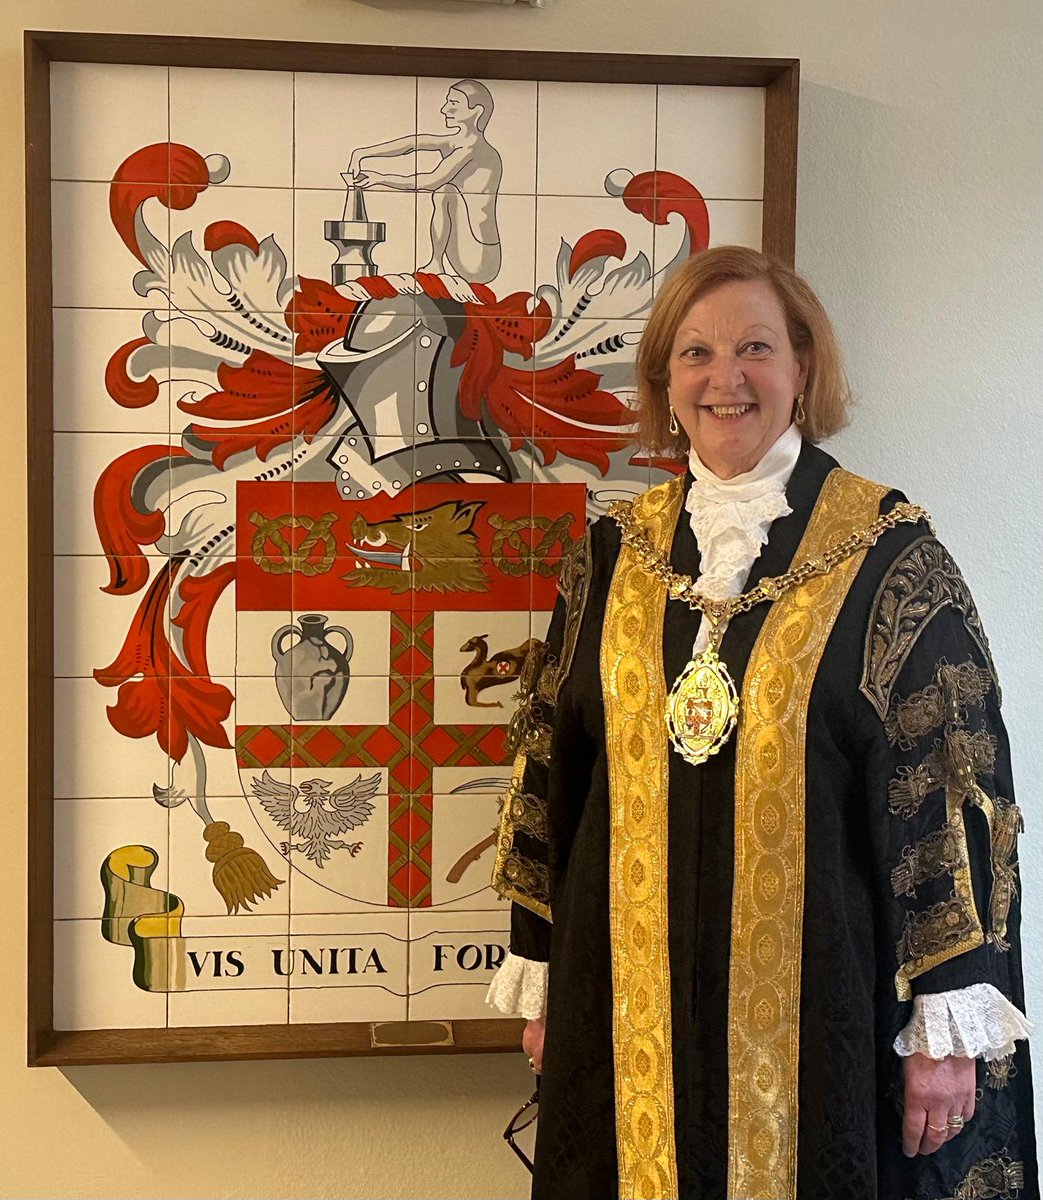 The 98th Lord Mayor of Stoke-on-Trent has officially been appointed.

Cllr Lyn Sharpe was selected as the city’s Lord Mayor during Stoke-on-Trent City Council’s annual council.

A true community champion, volunteering at the Foodbank & supporting Fenton Town Hall & more.